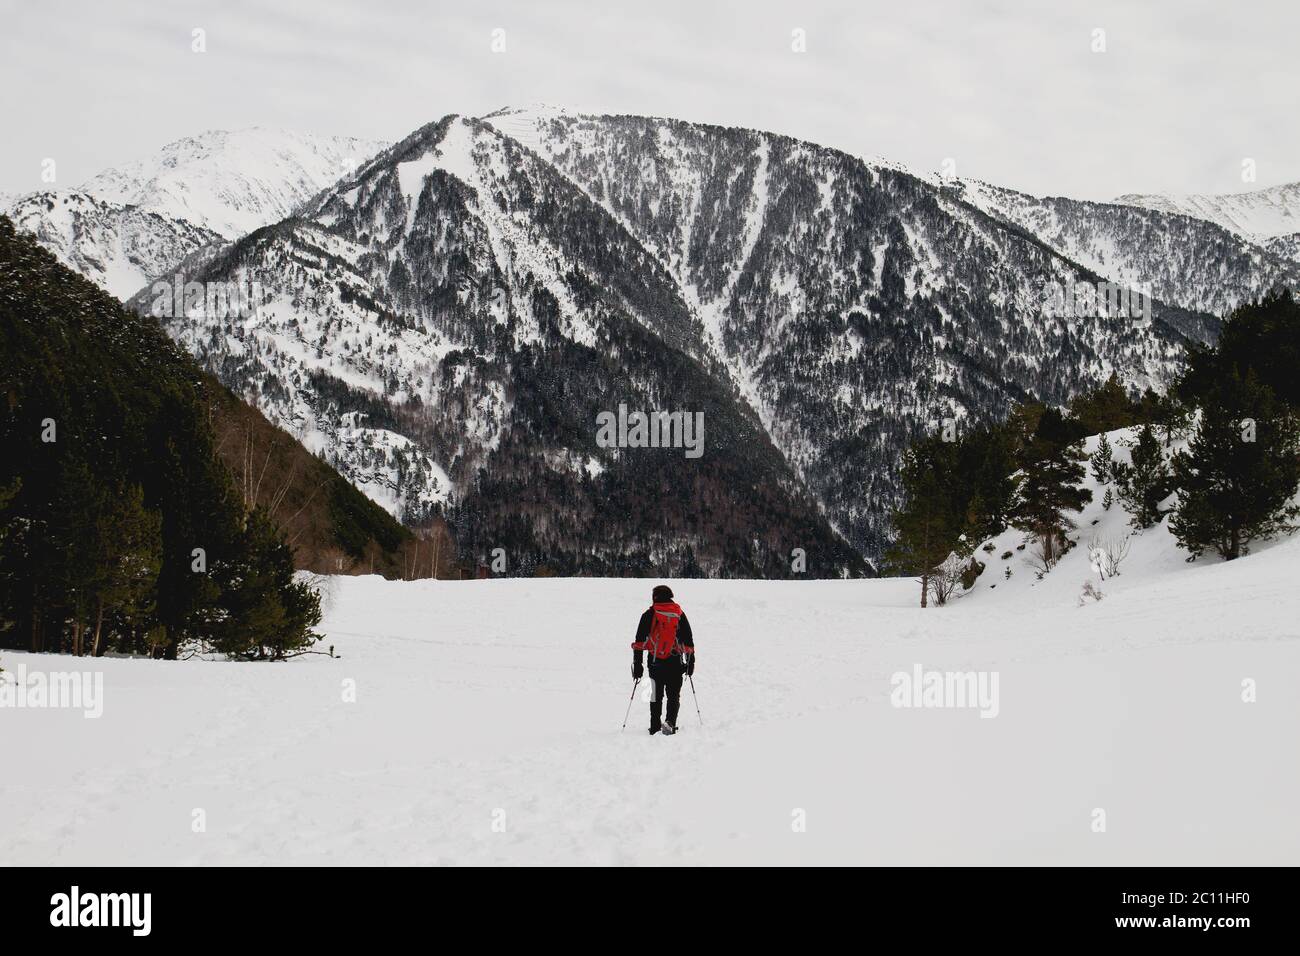 Man hiking on the wintry mountains with snow rackets Stock Photo